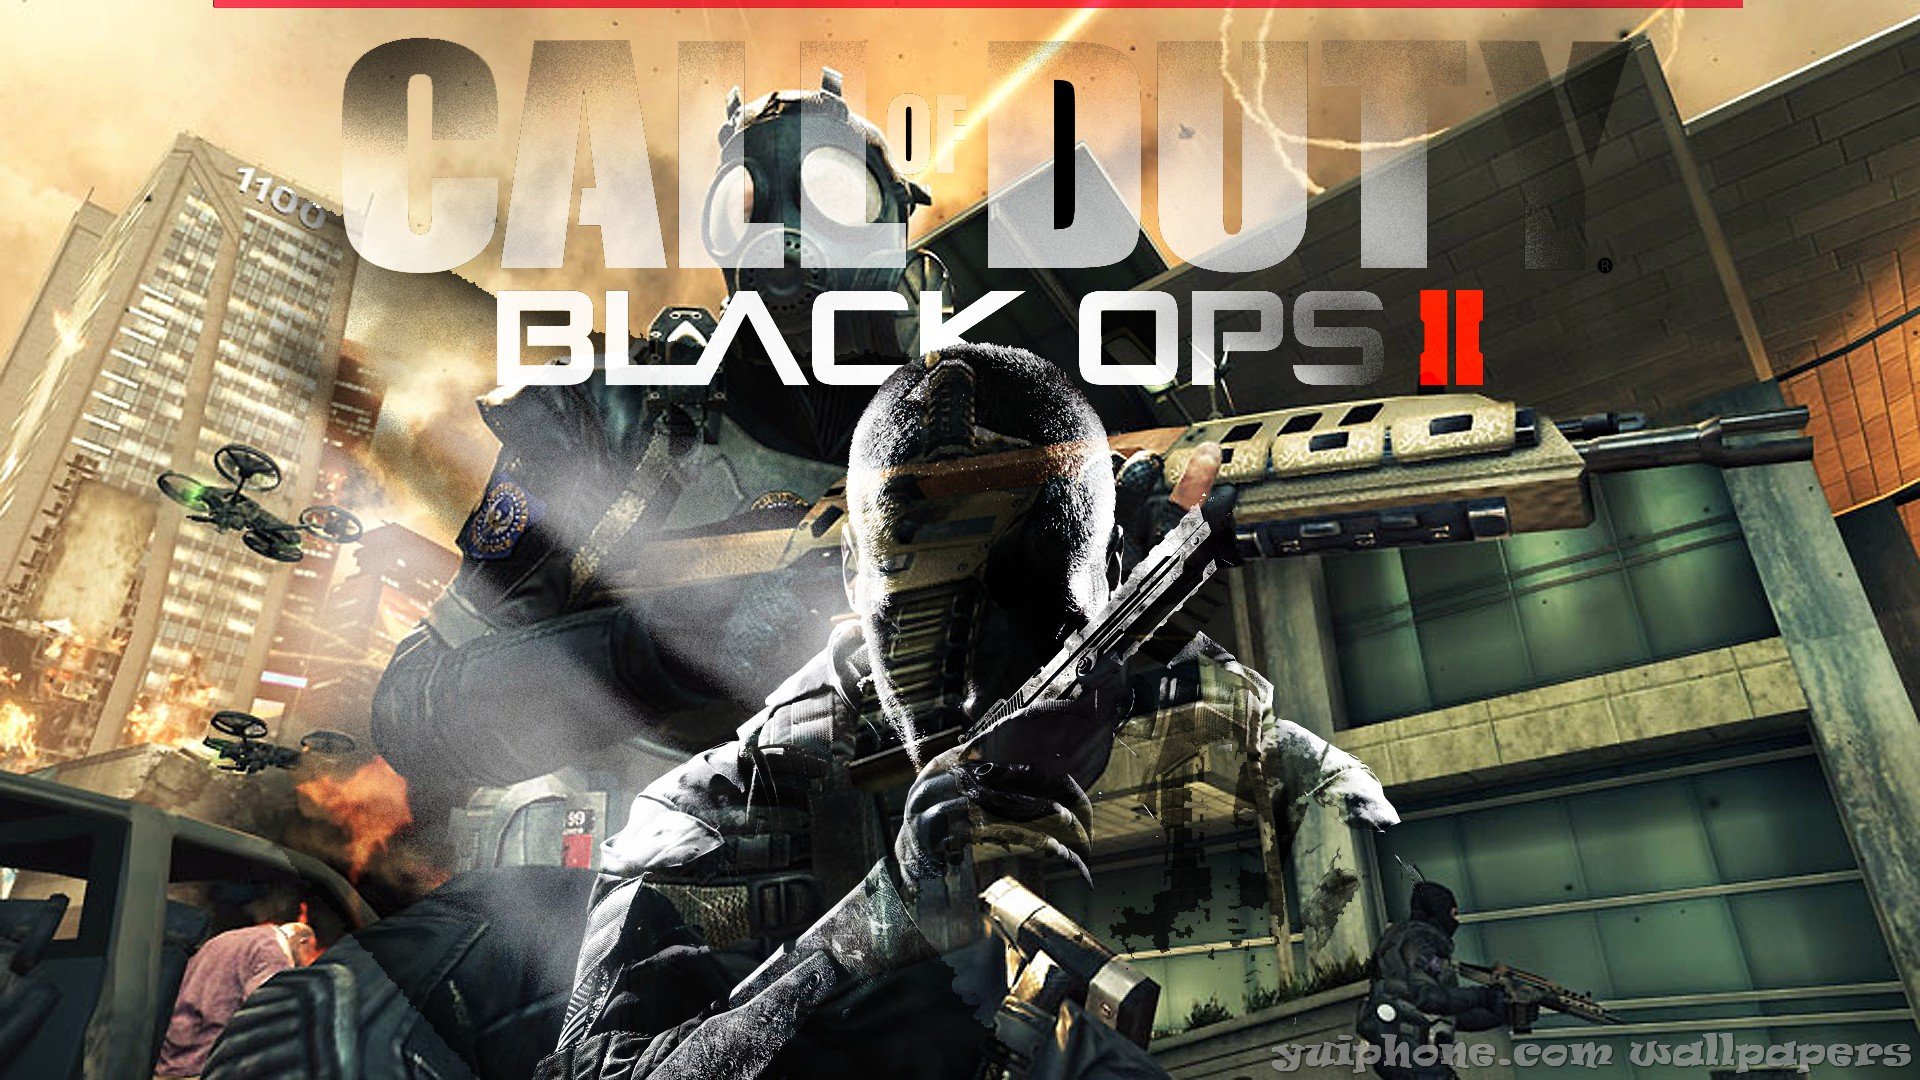 ops 2 zombies wallpaper 1080pBlack Ops 2 HD Wallpapers 1080p Black Ops 1920x1080